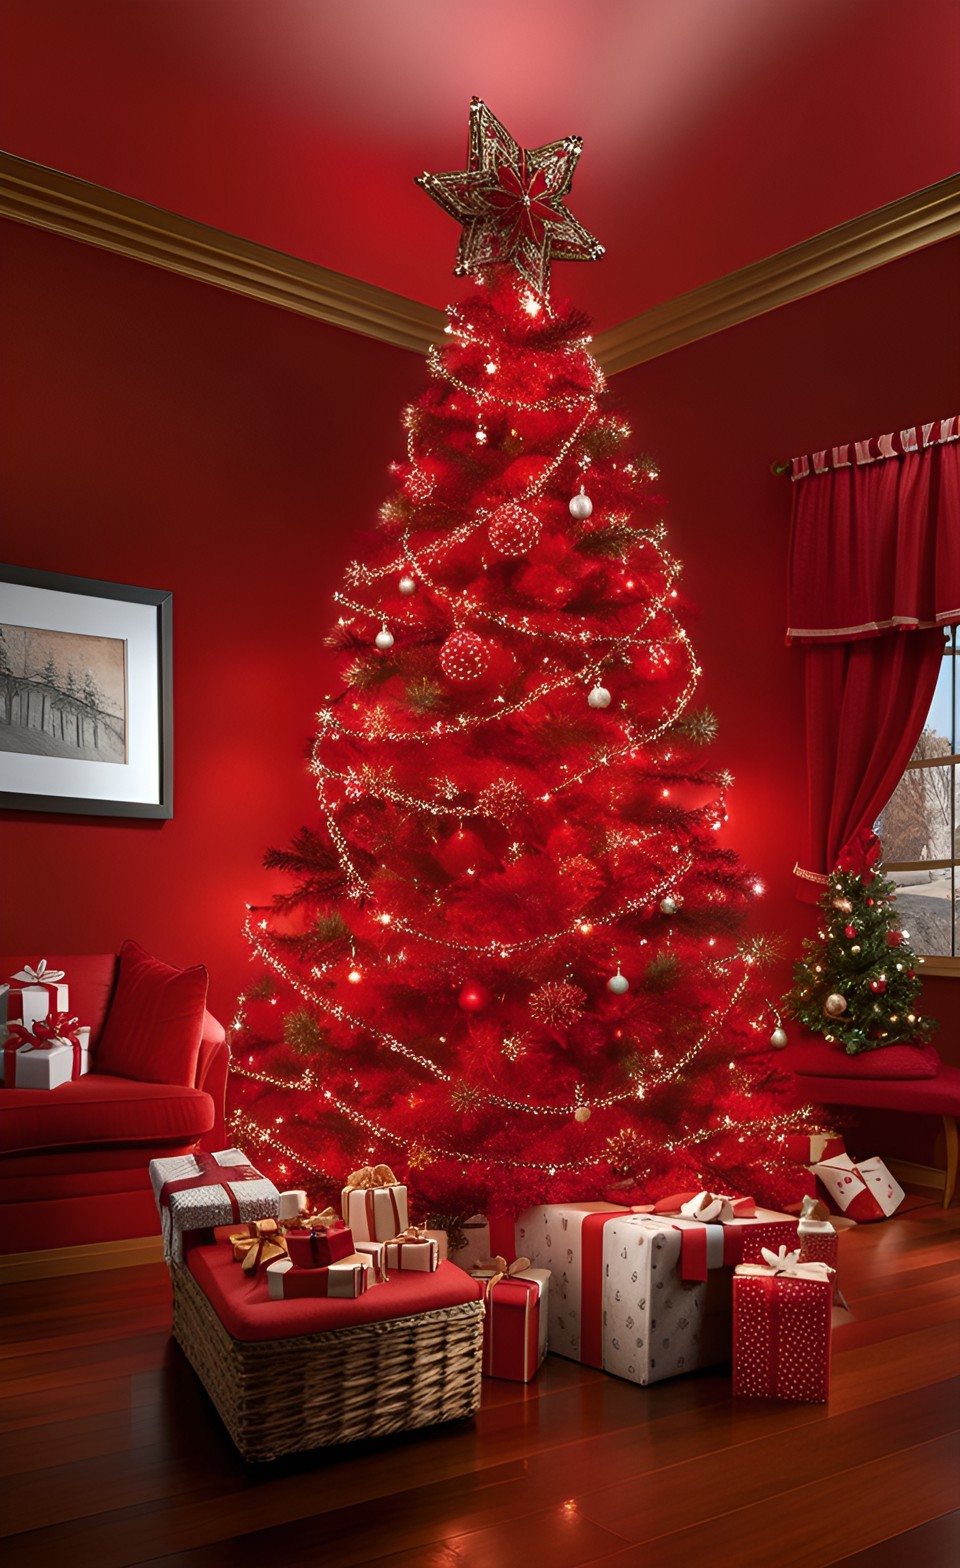 13 of the Best Red Christmas Tree Ideas